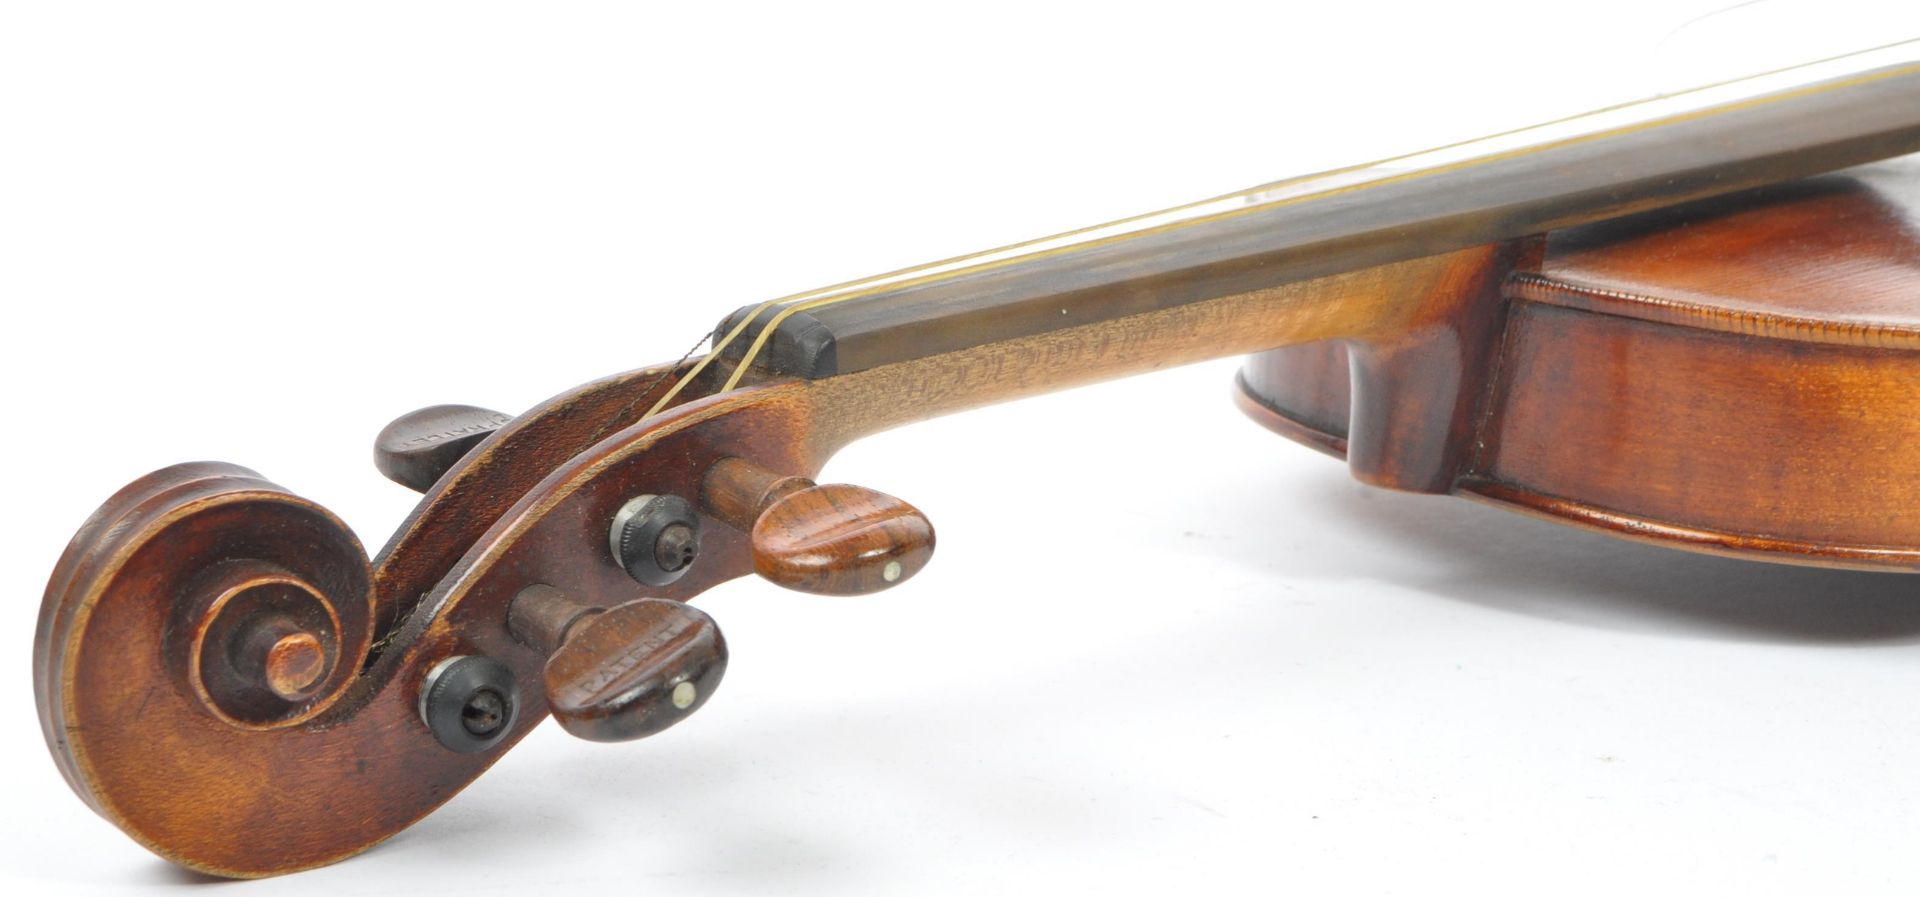 20TH CENTURY FULL SIZE VIOLIN WITH TWO PIECE BACK - Image 8 of 10